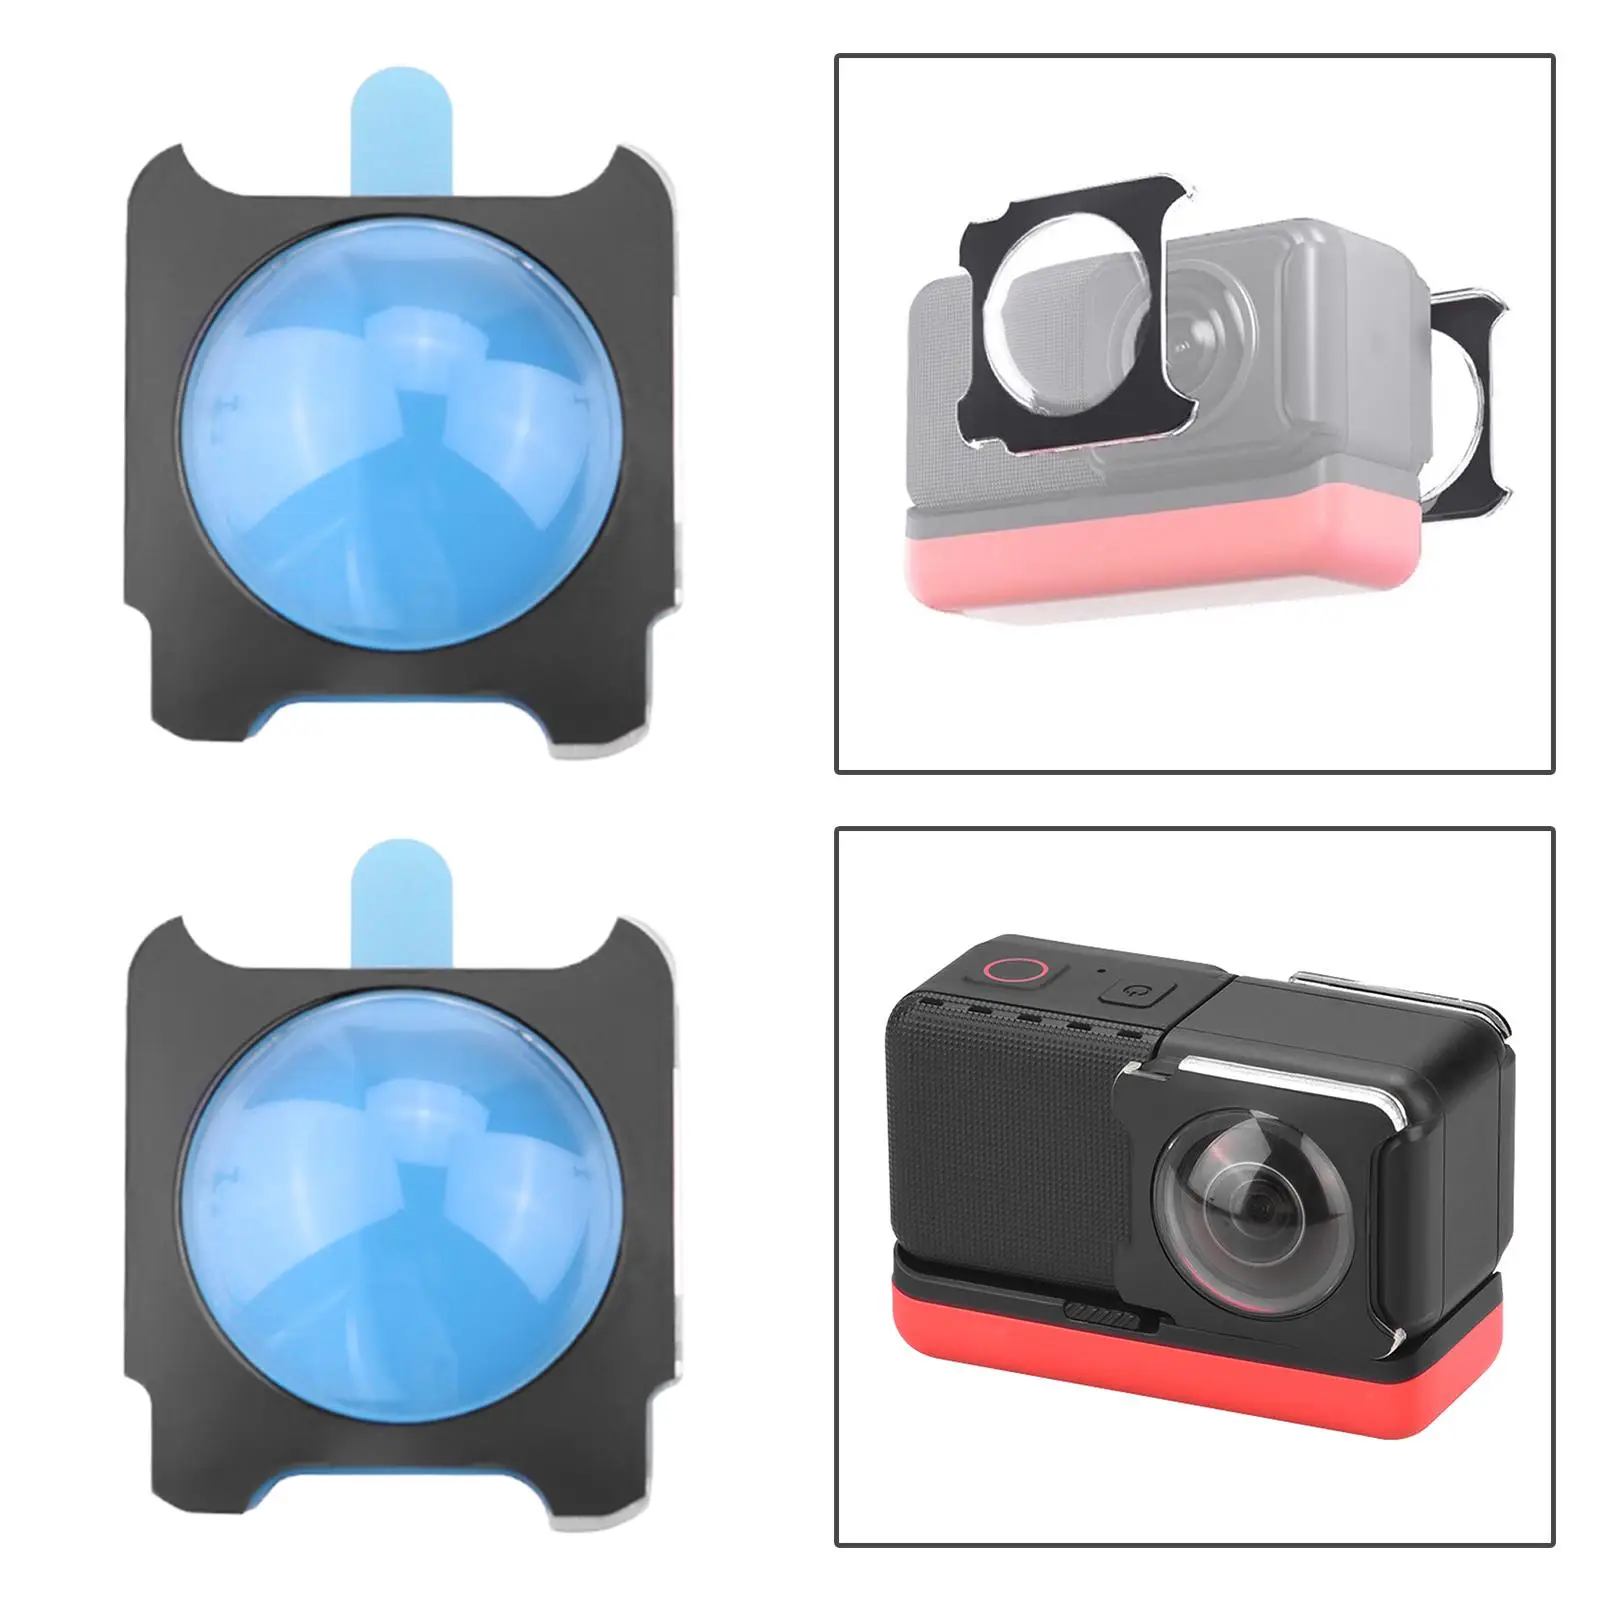 2Pcs Panoramic Lens Protector Lens Guards Caps for/R Camera Accessories clearly recover shooting colors of the lens;